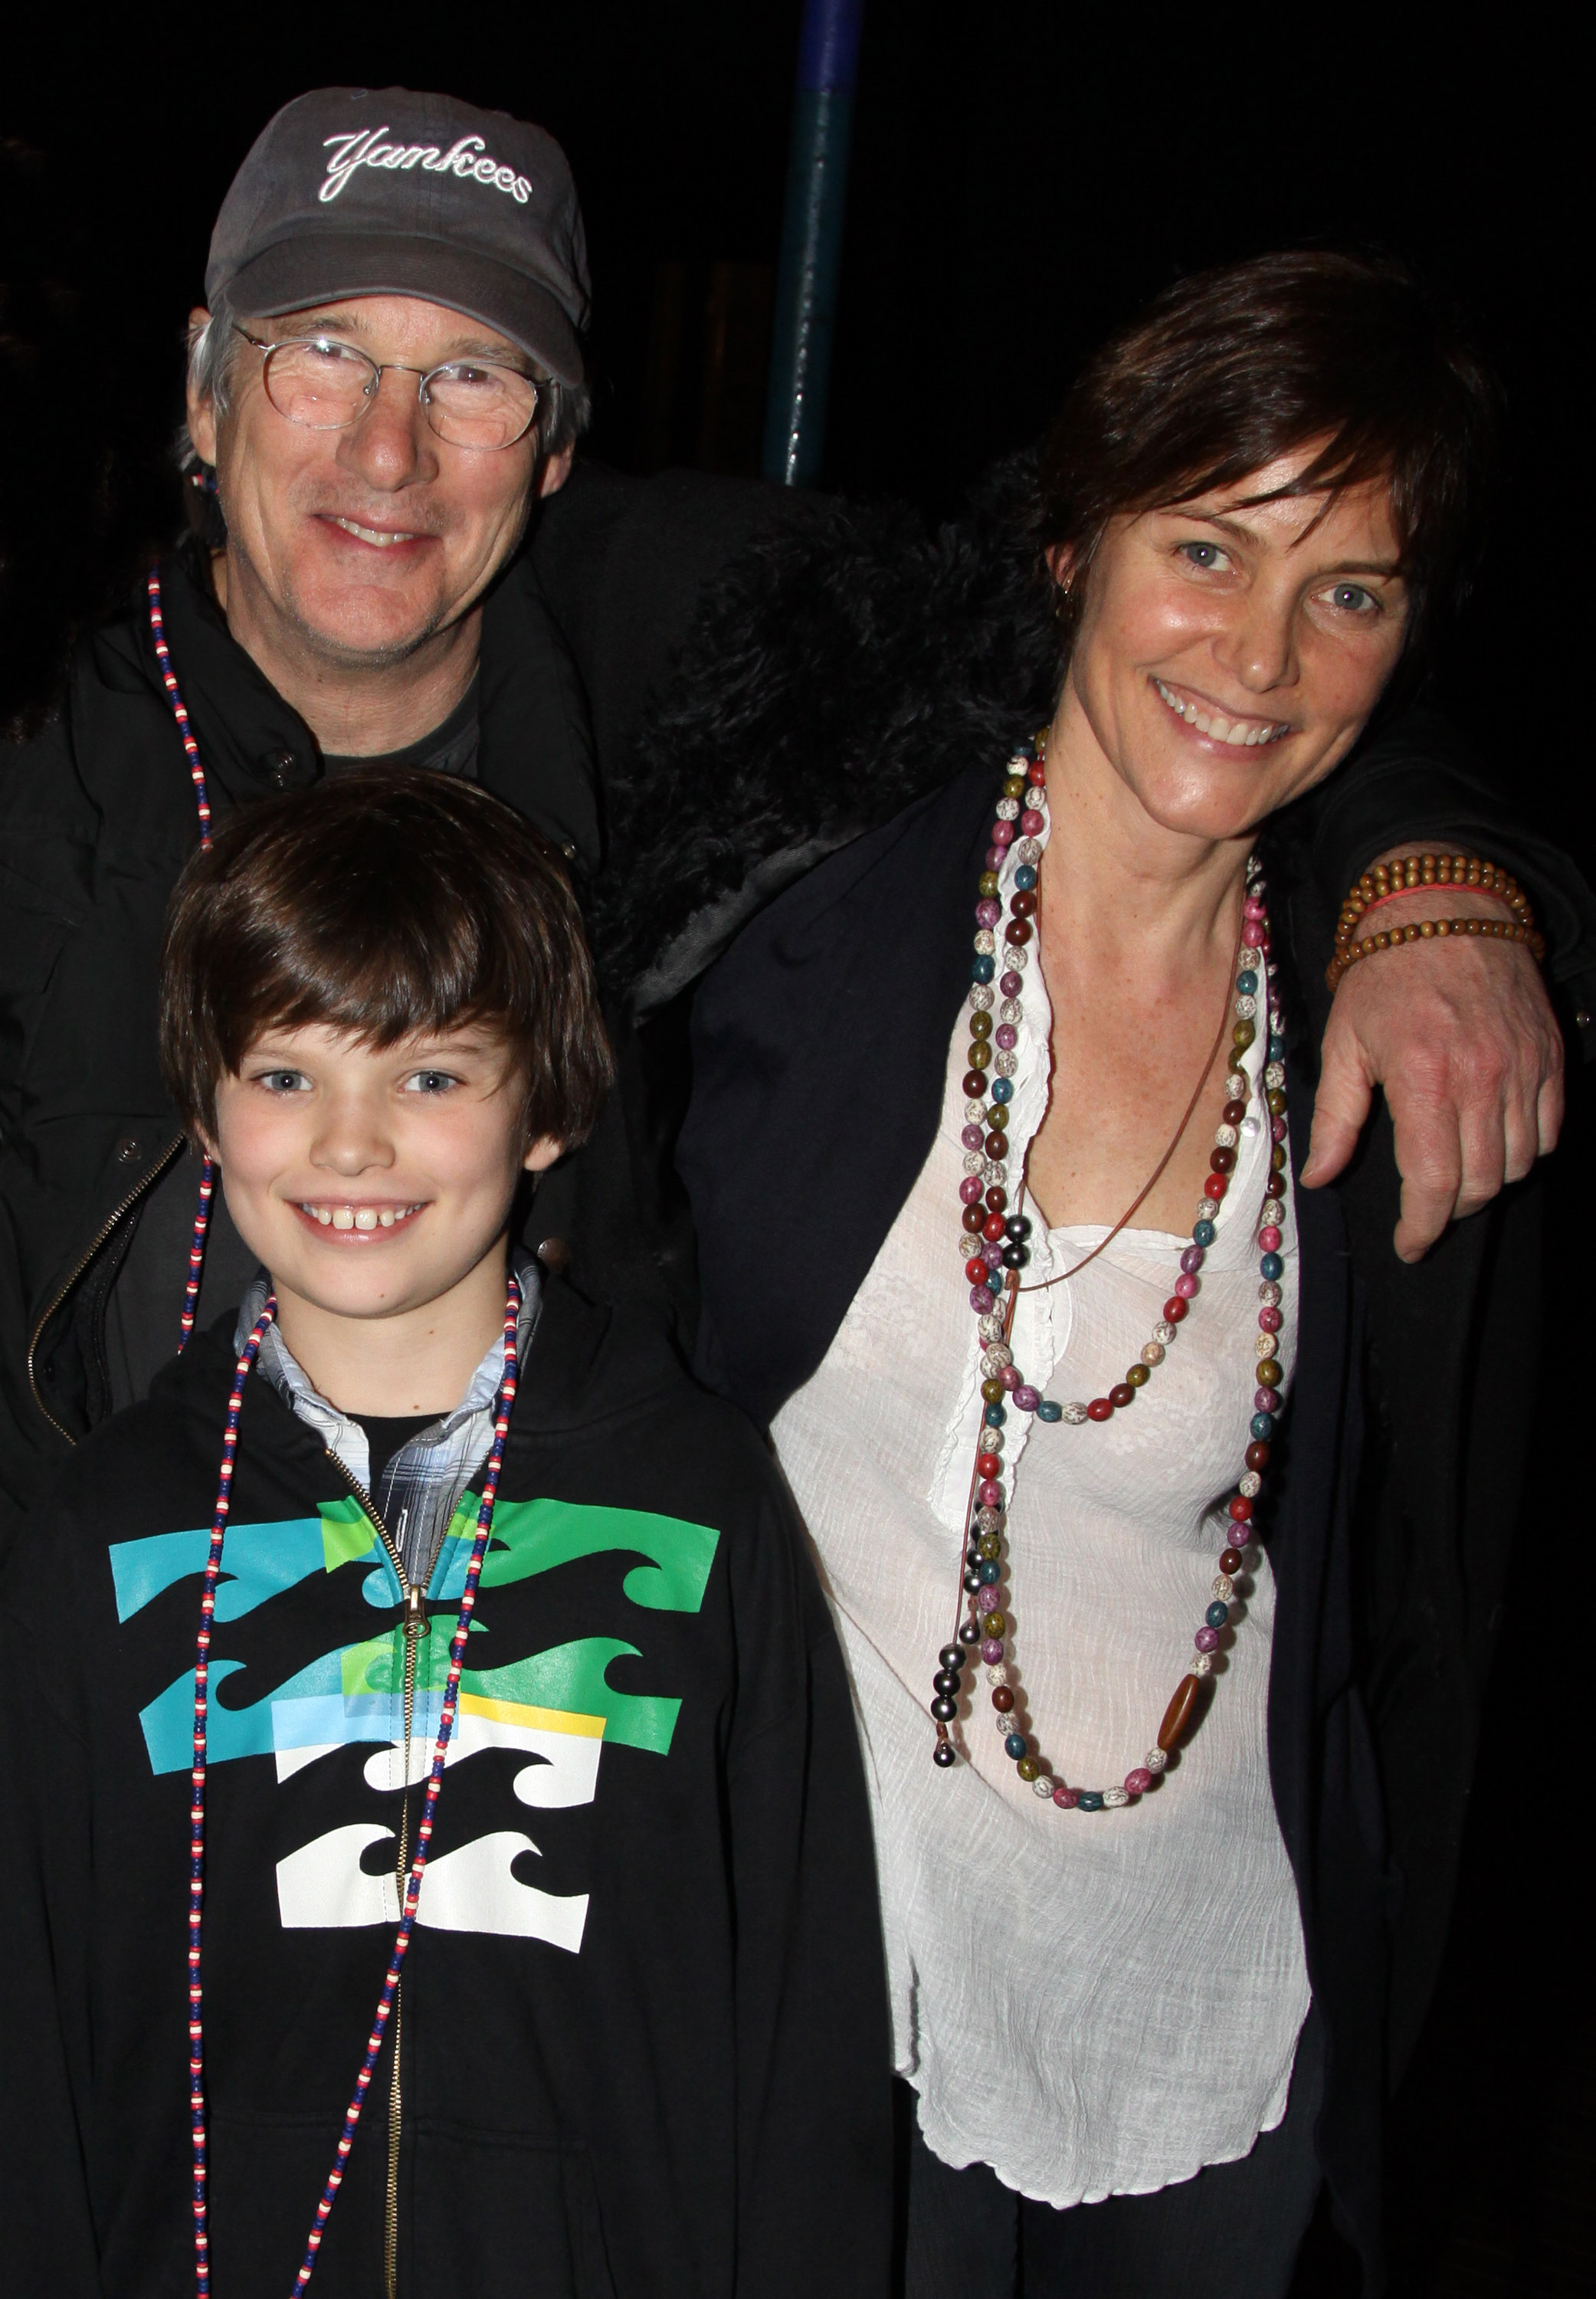 Richard Gere, Homer James Jigme Gere, and Carey Lowell backstage at the Broadway musical "Hair" in New York City on March 14, 2010 | Source: Getty Images